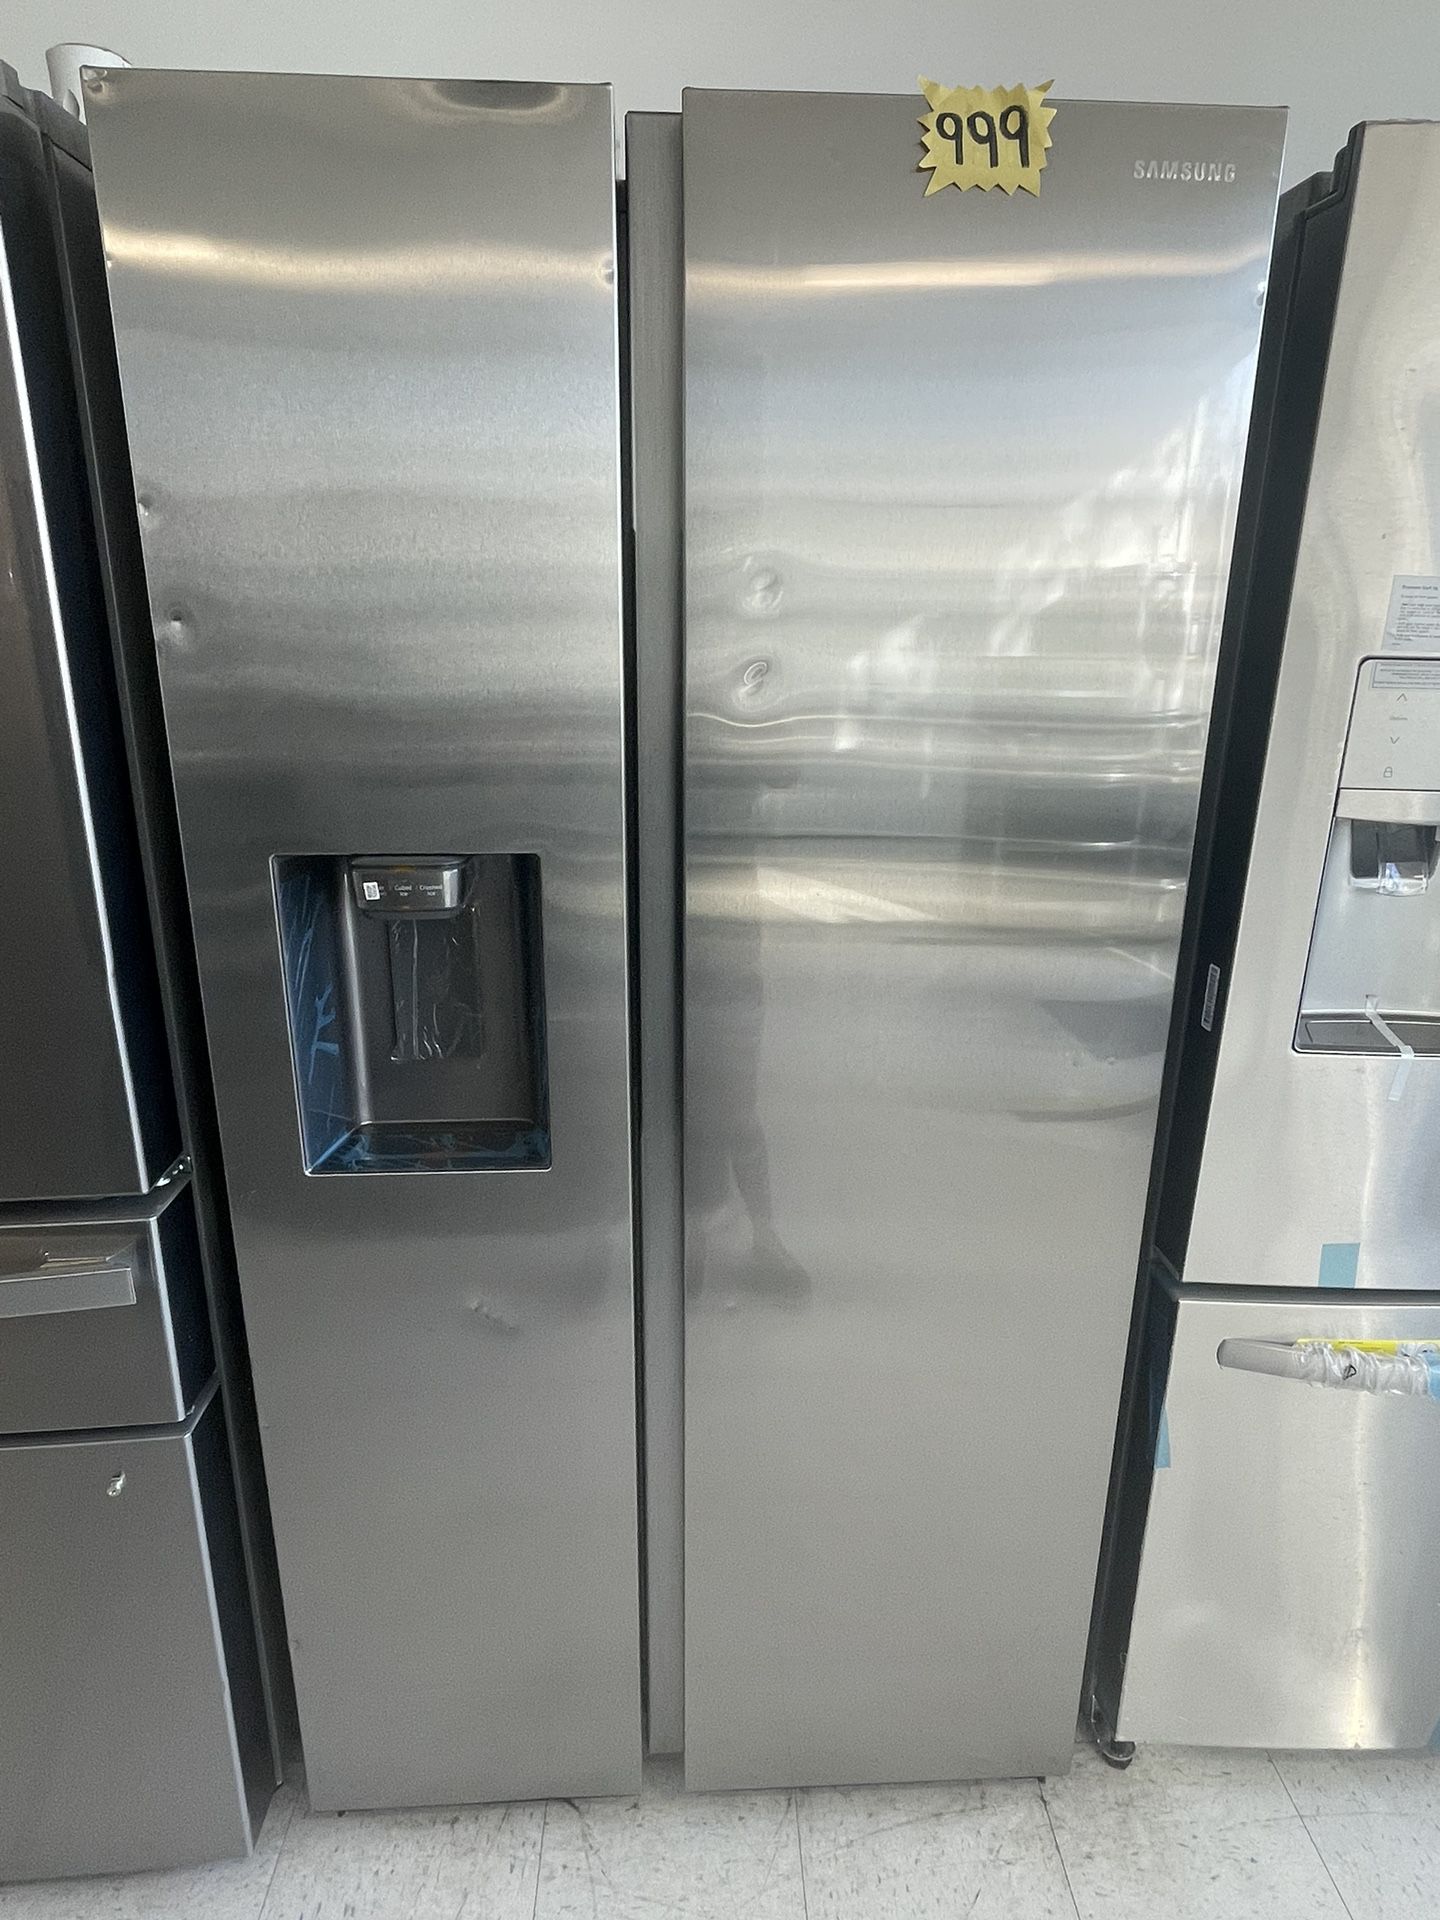 Samsung Stainless Steel Side By Side Refrigerator New Scratch And Dent With 6months Warranty 